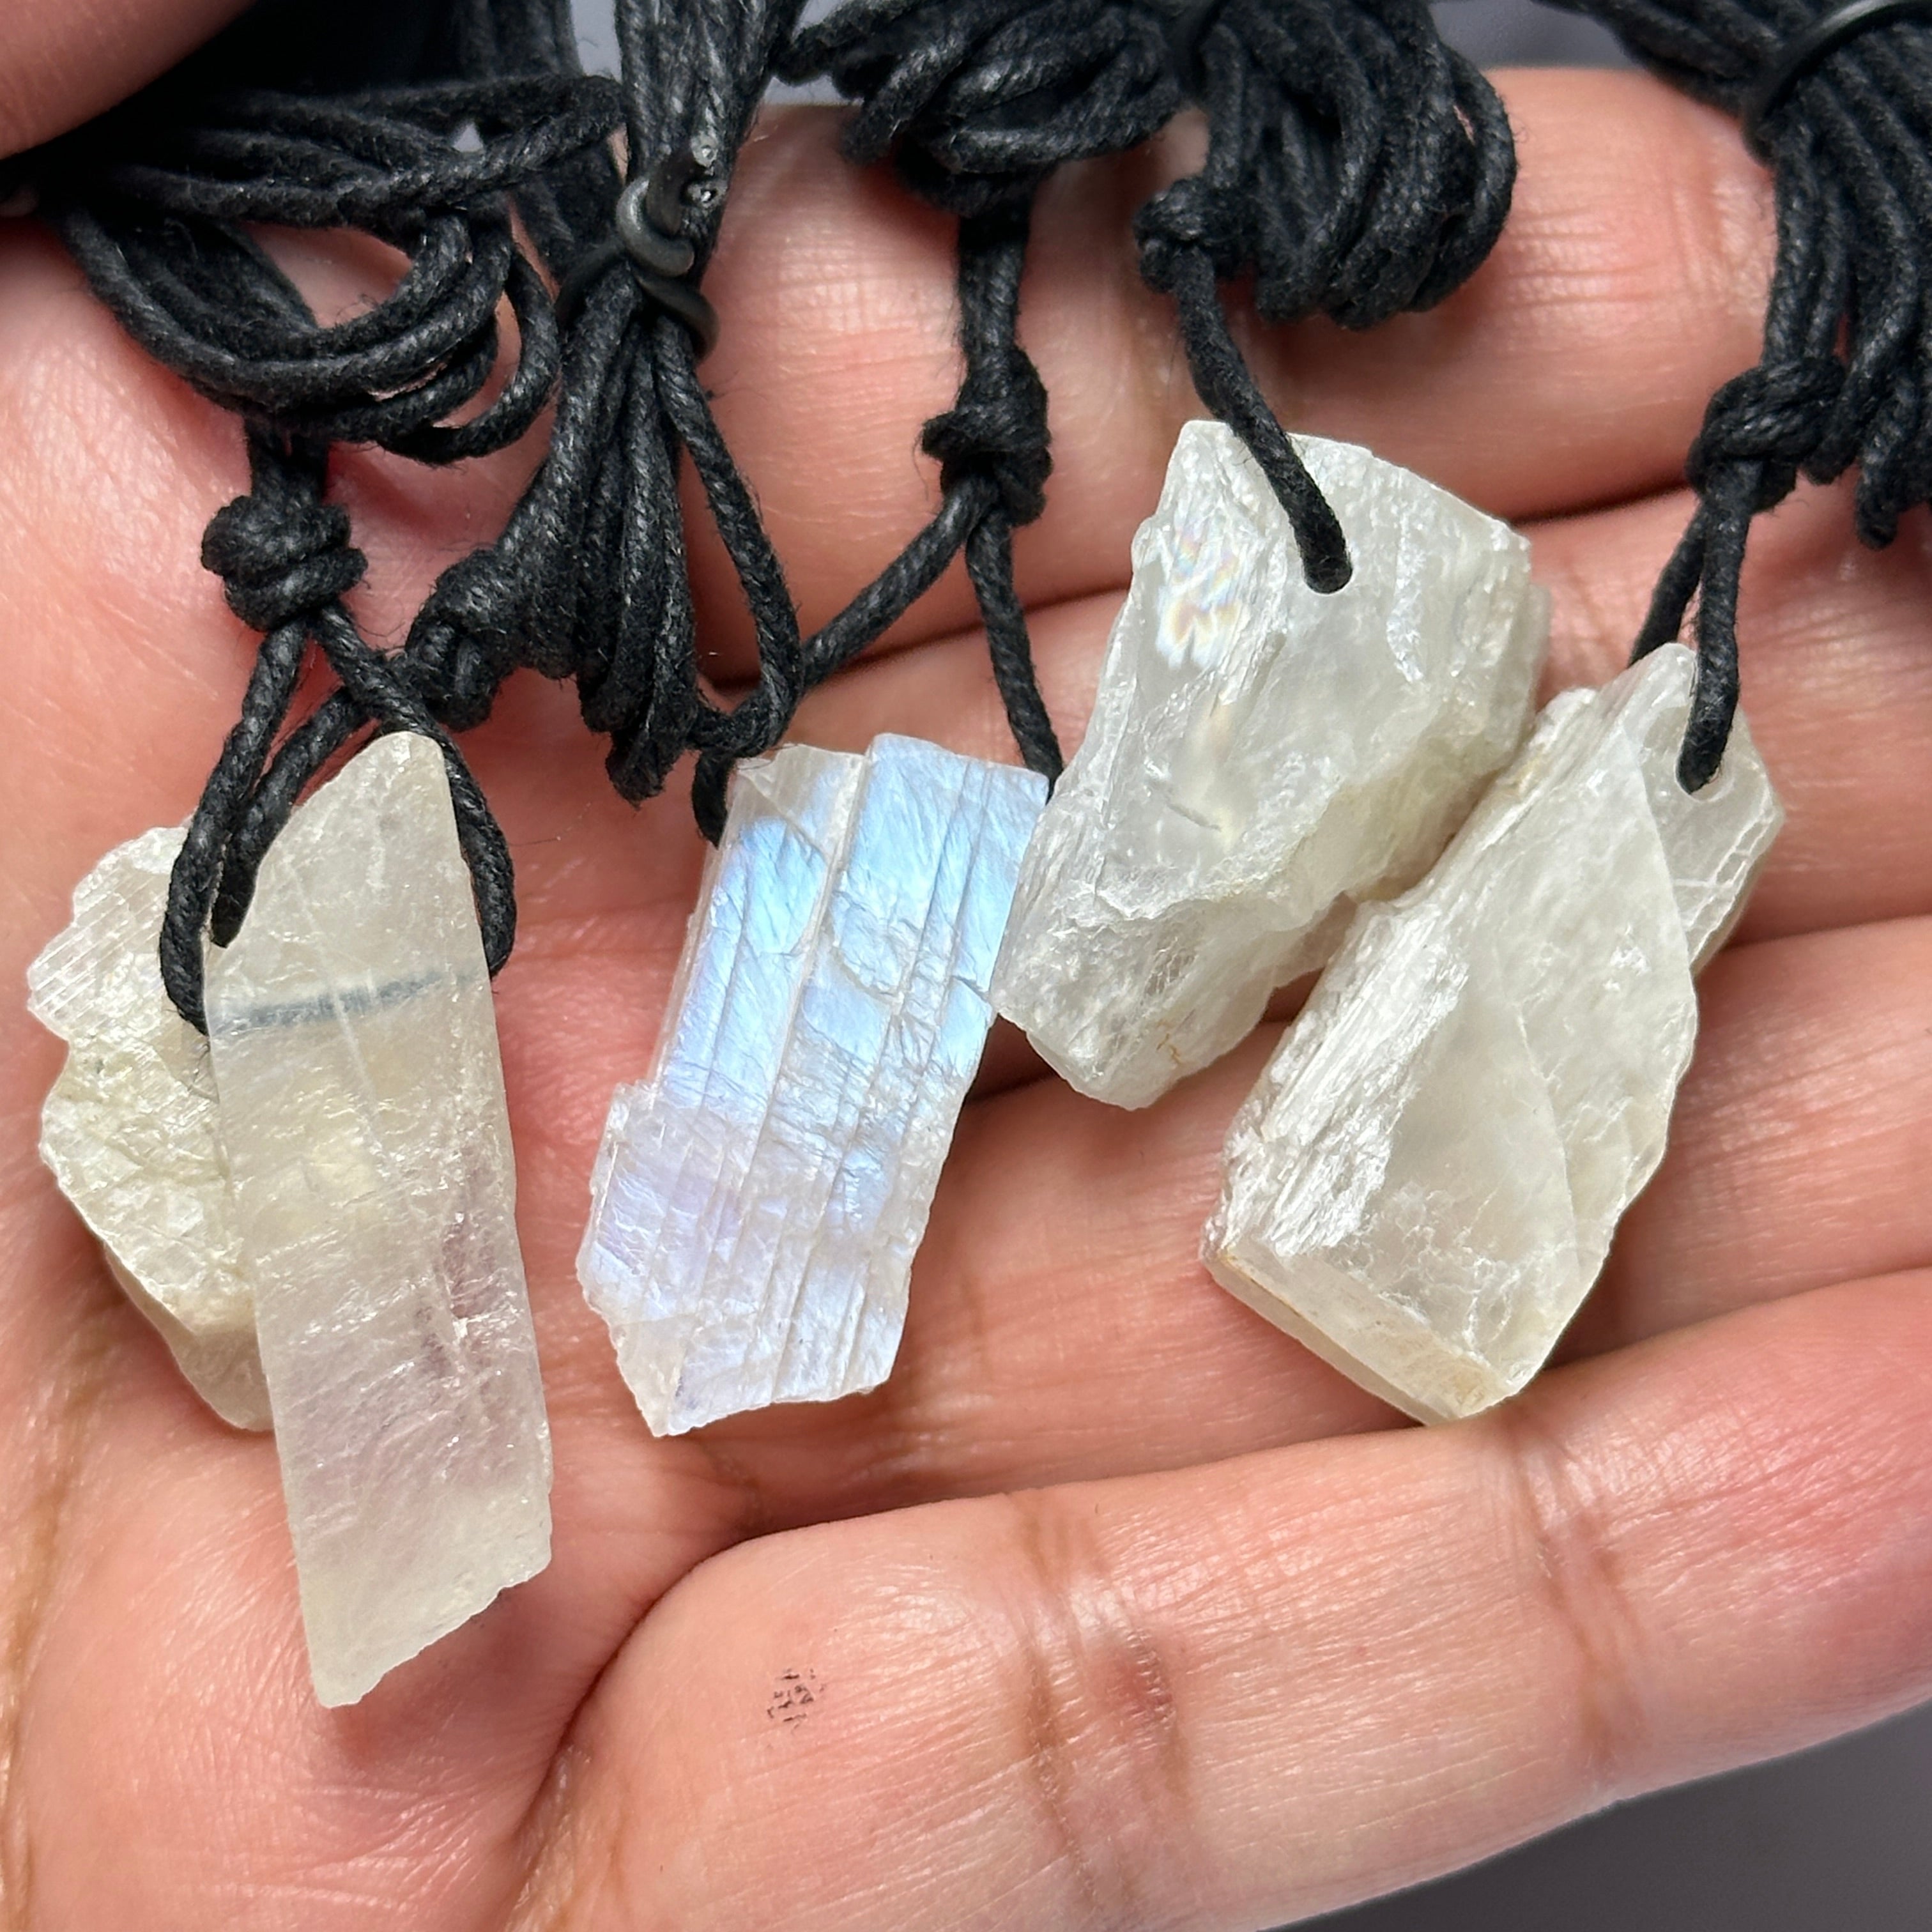 5 pcs Tanzanian Moonstone pendants lot. Price is for all 5